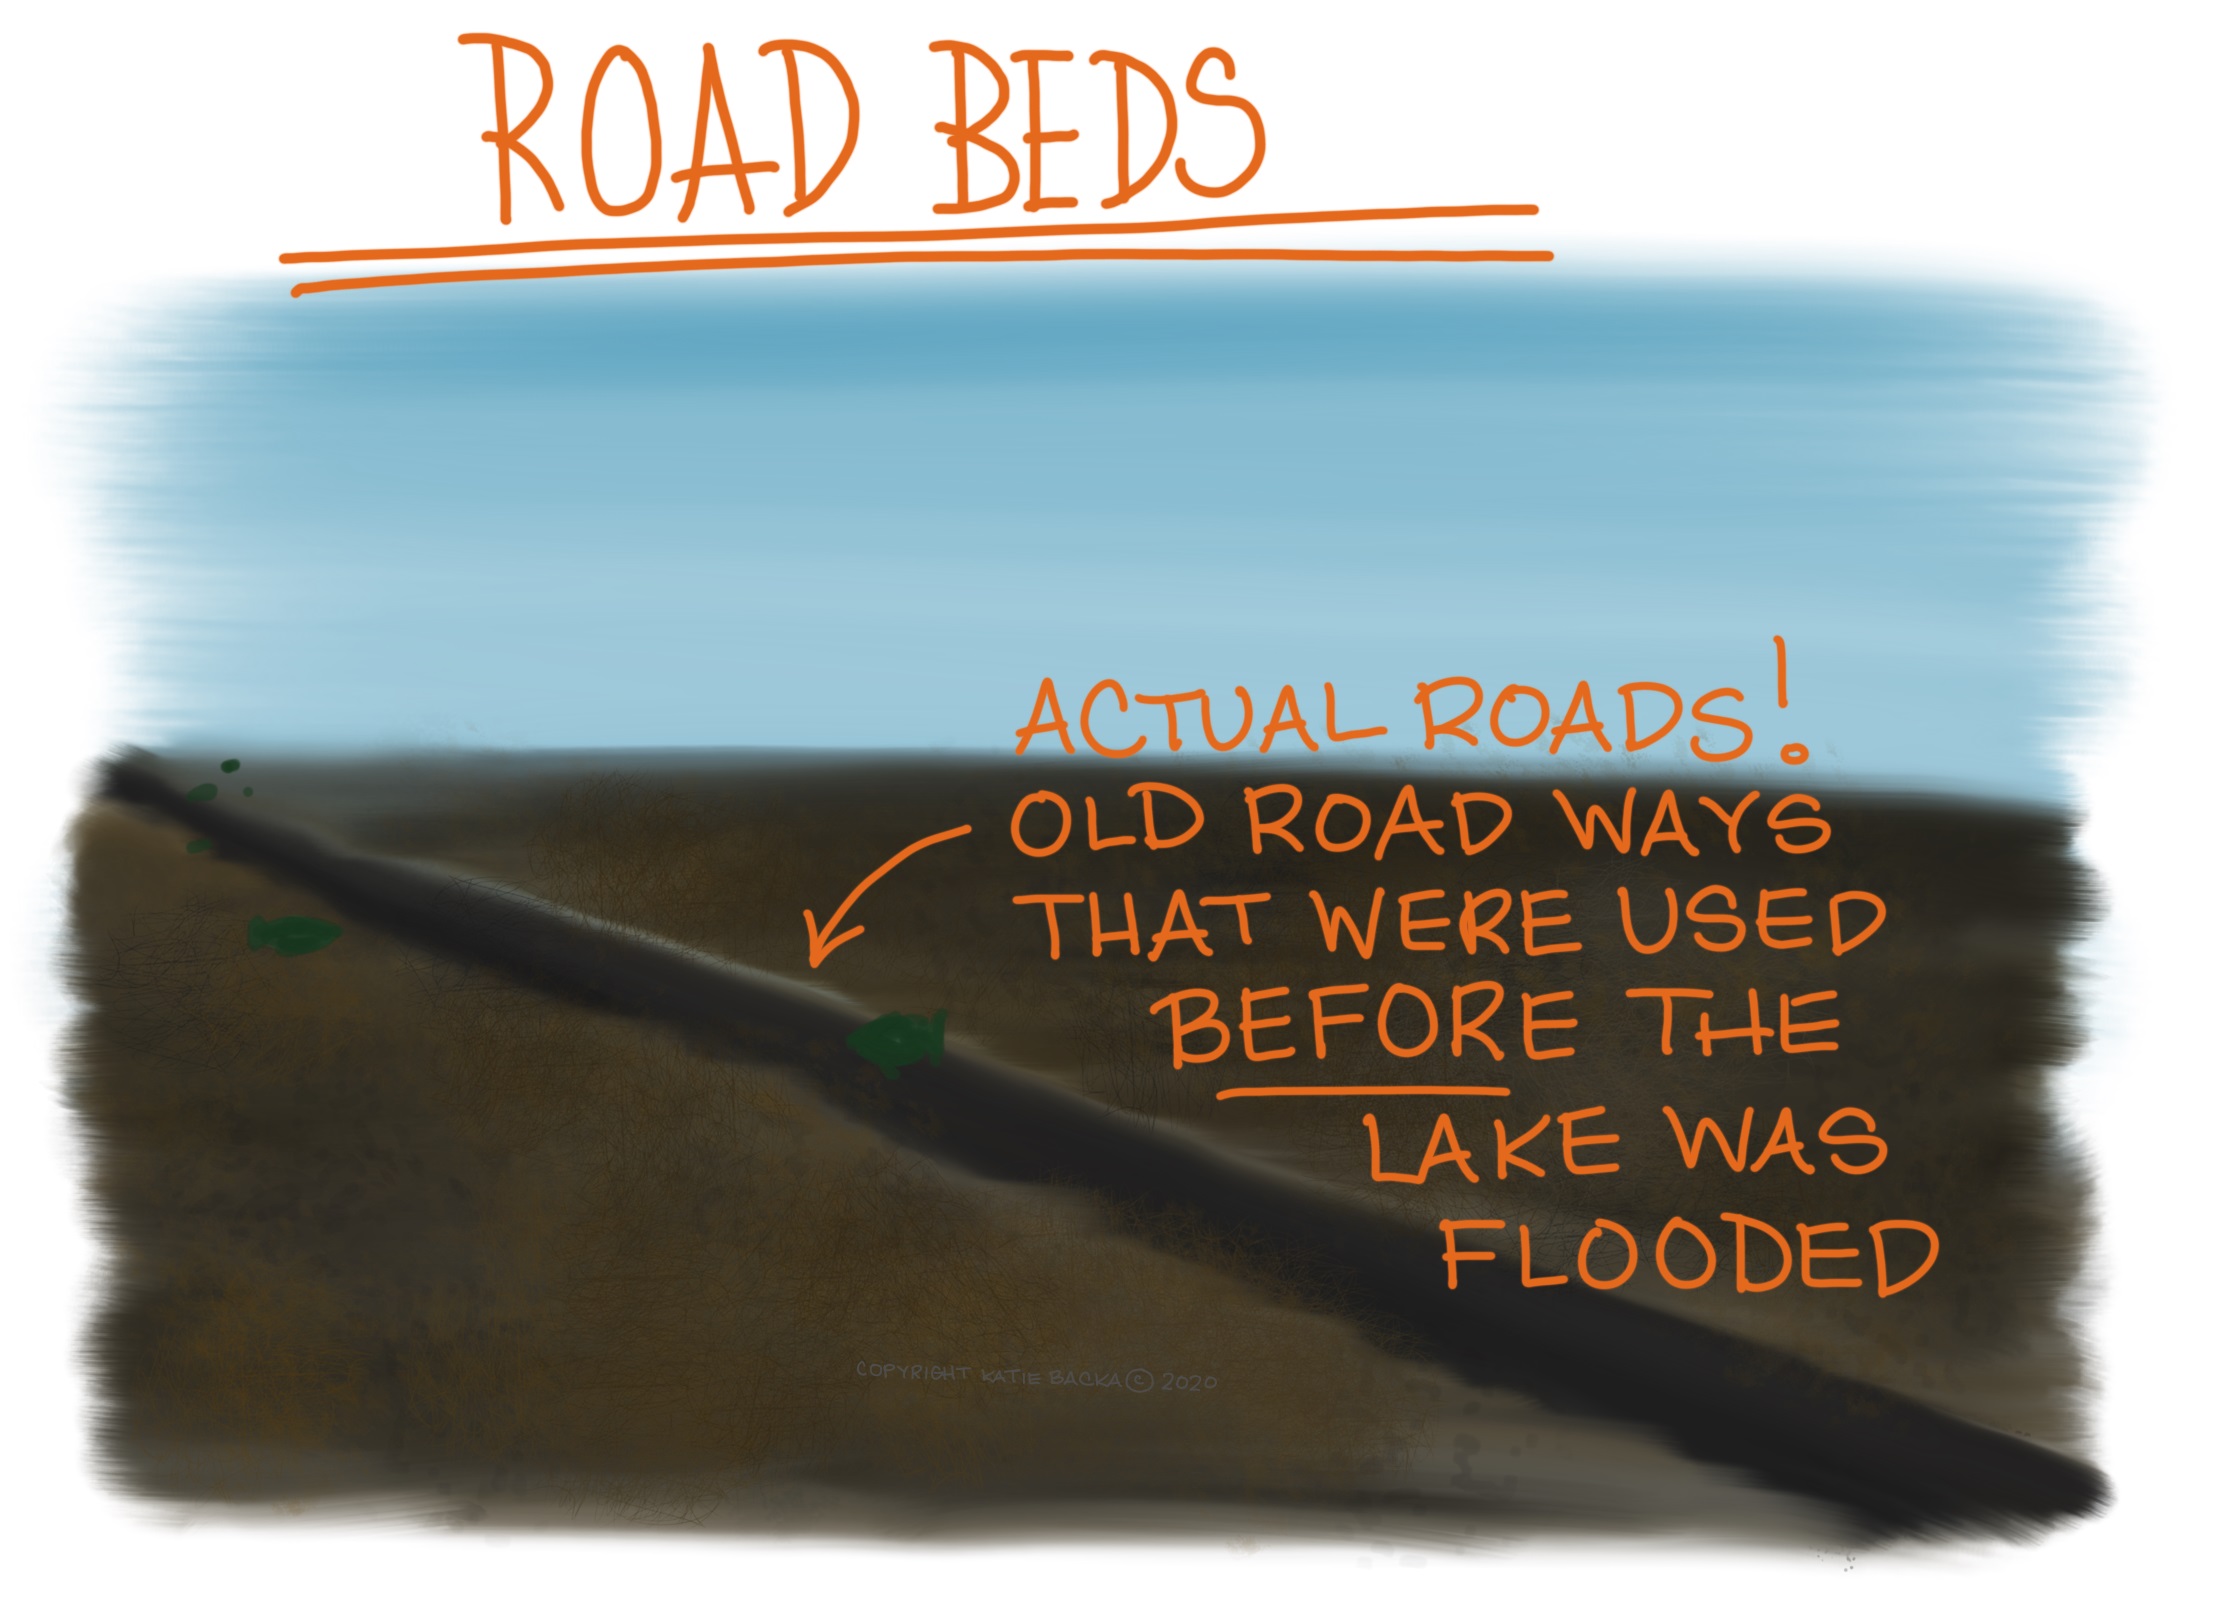 Script: Road beds, actual roads! Old road ways that were used before the lake was flooded